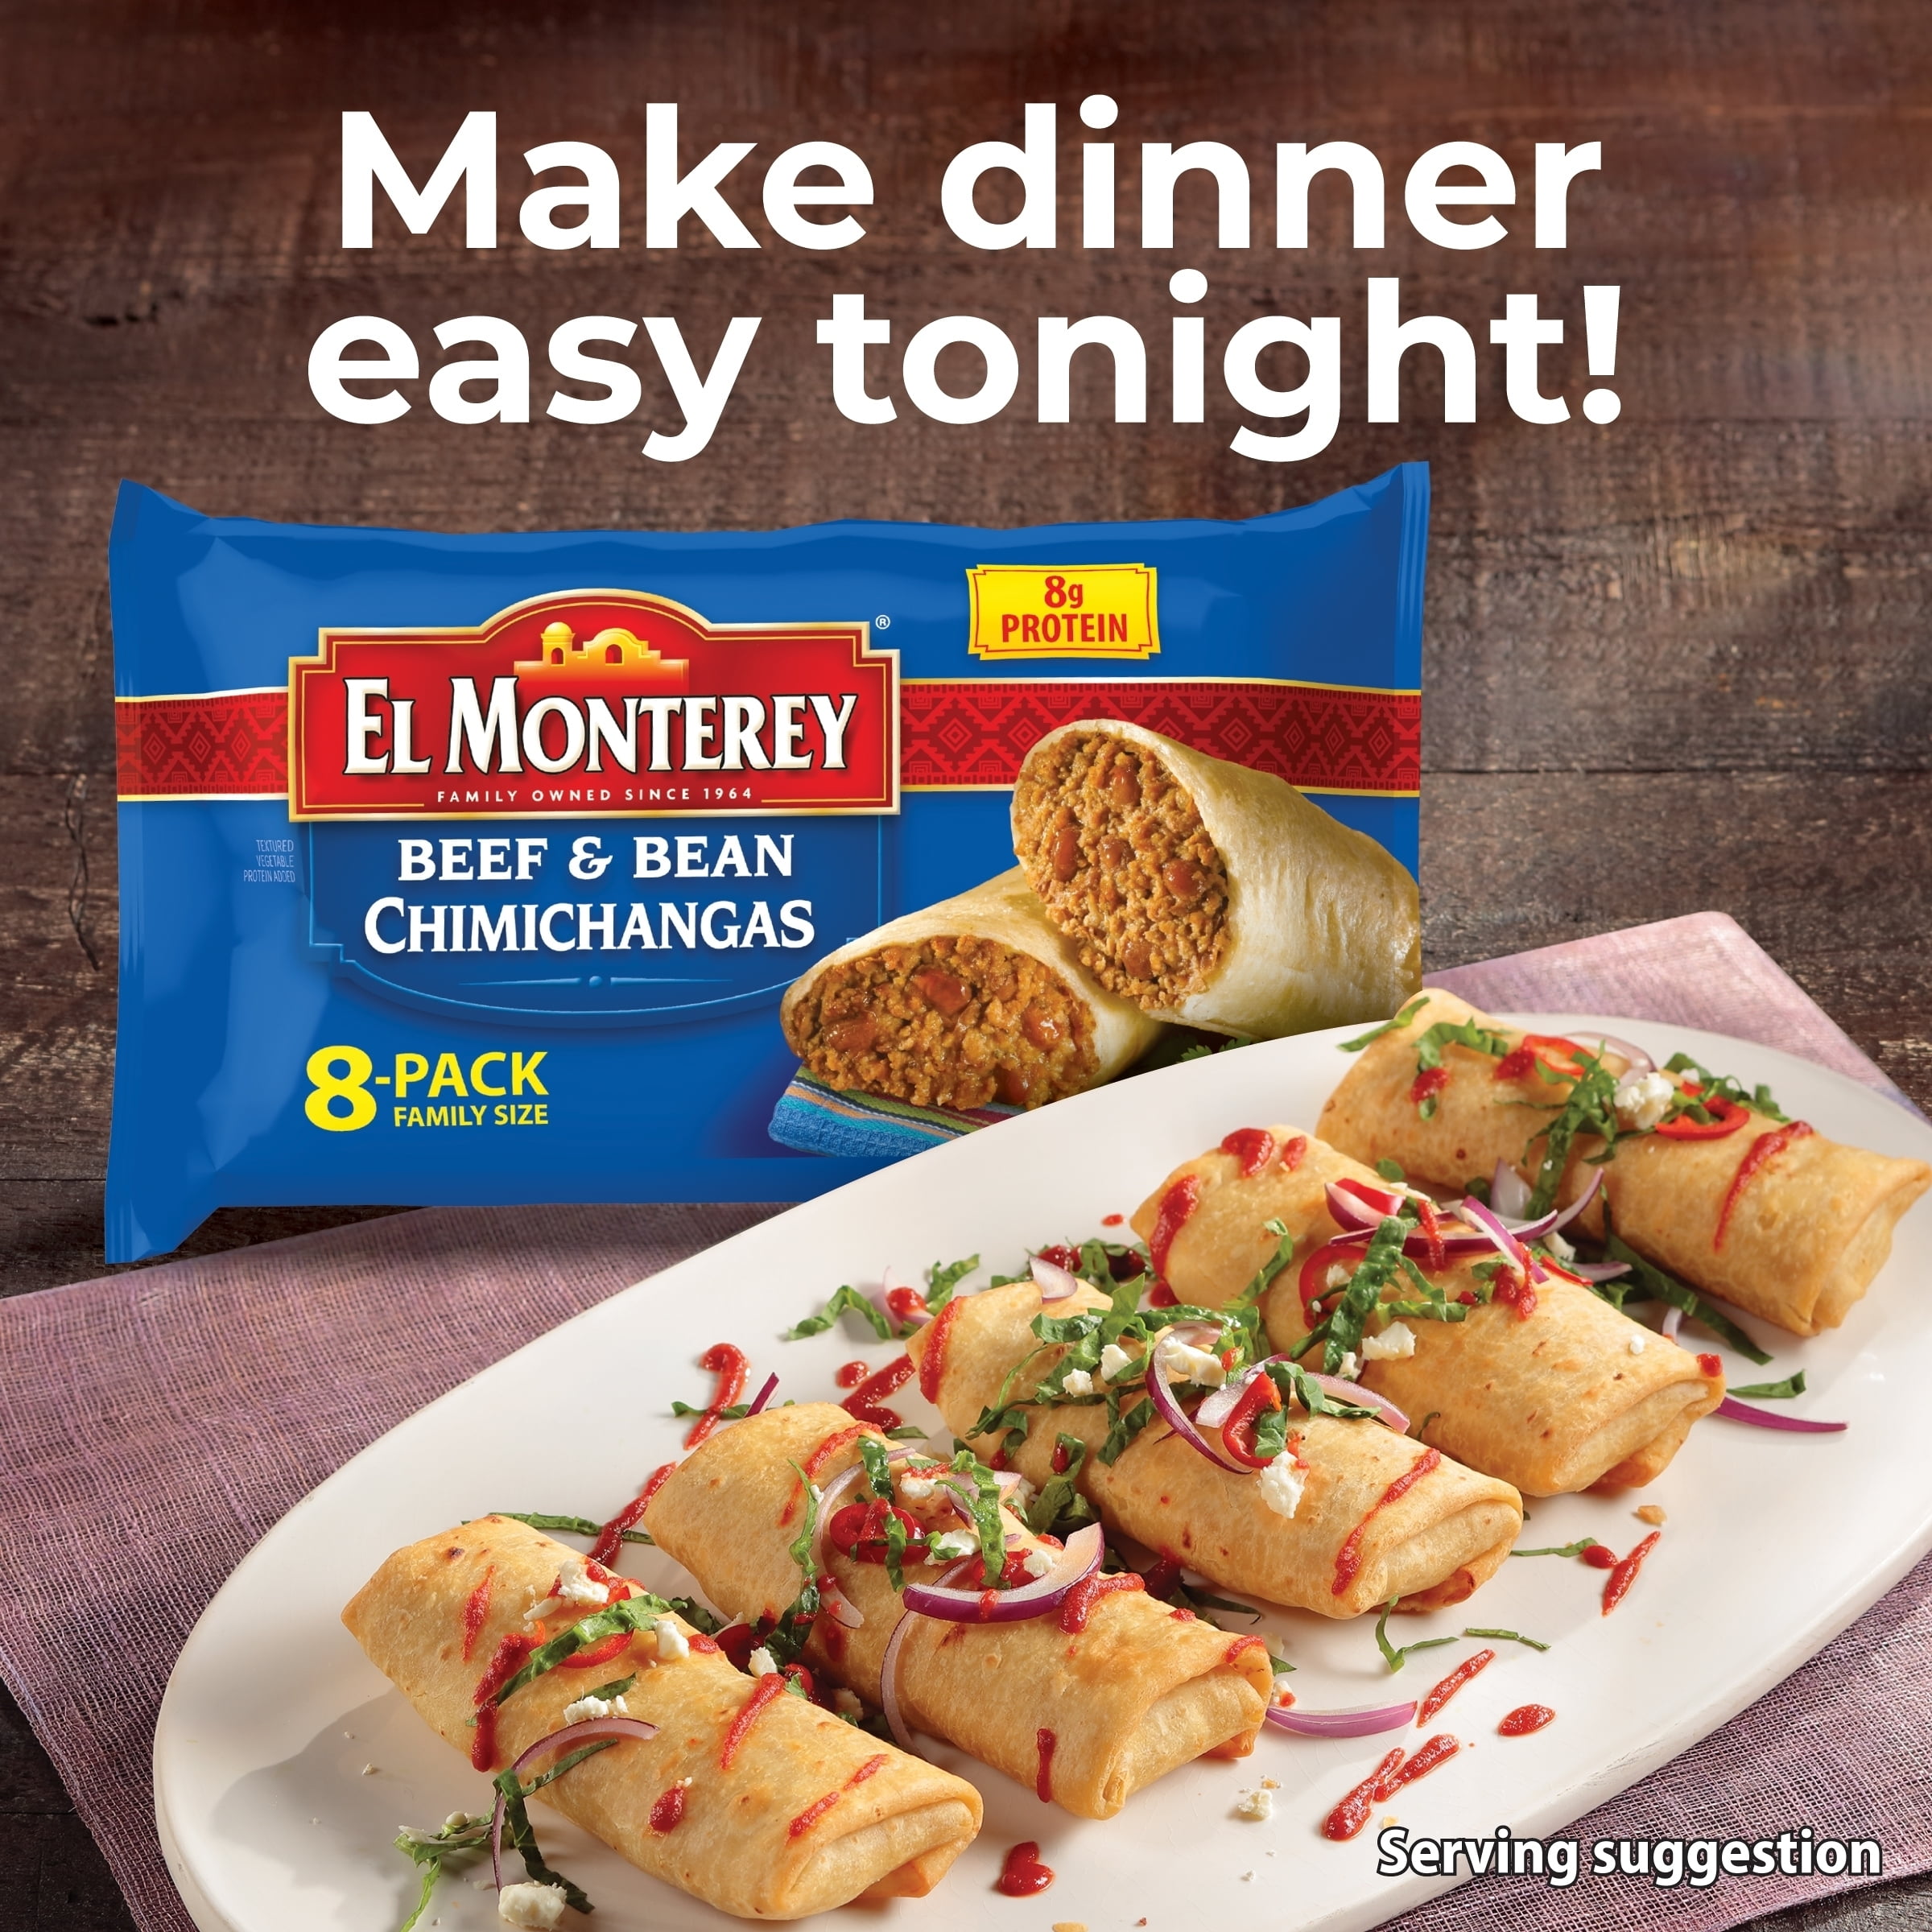 COME SEE HOW AMERICAN FROZEN LUNCH LOOKS LIKE/CHIMICHANGAS 